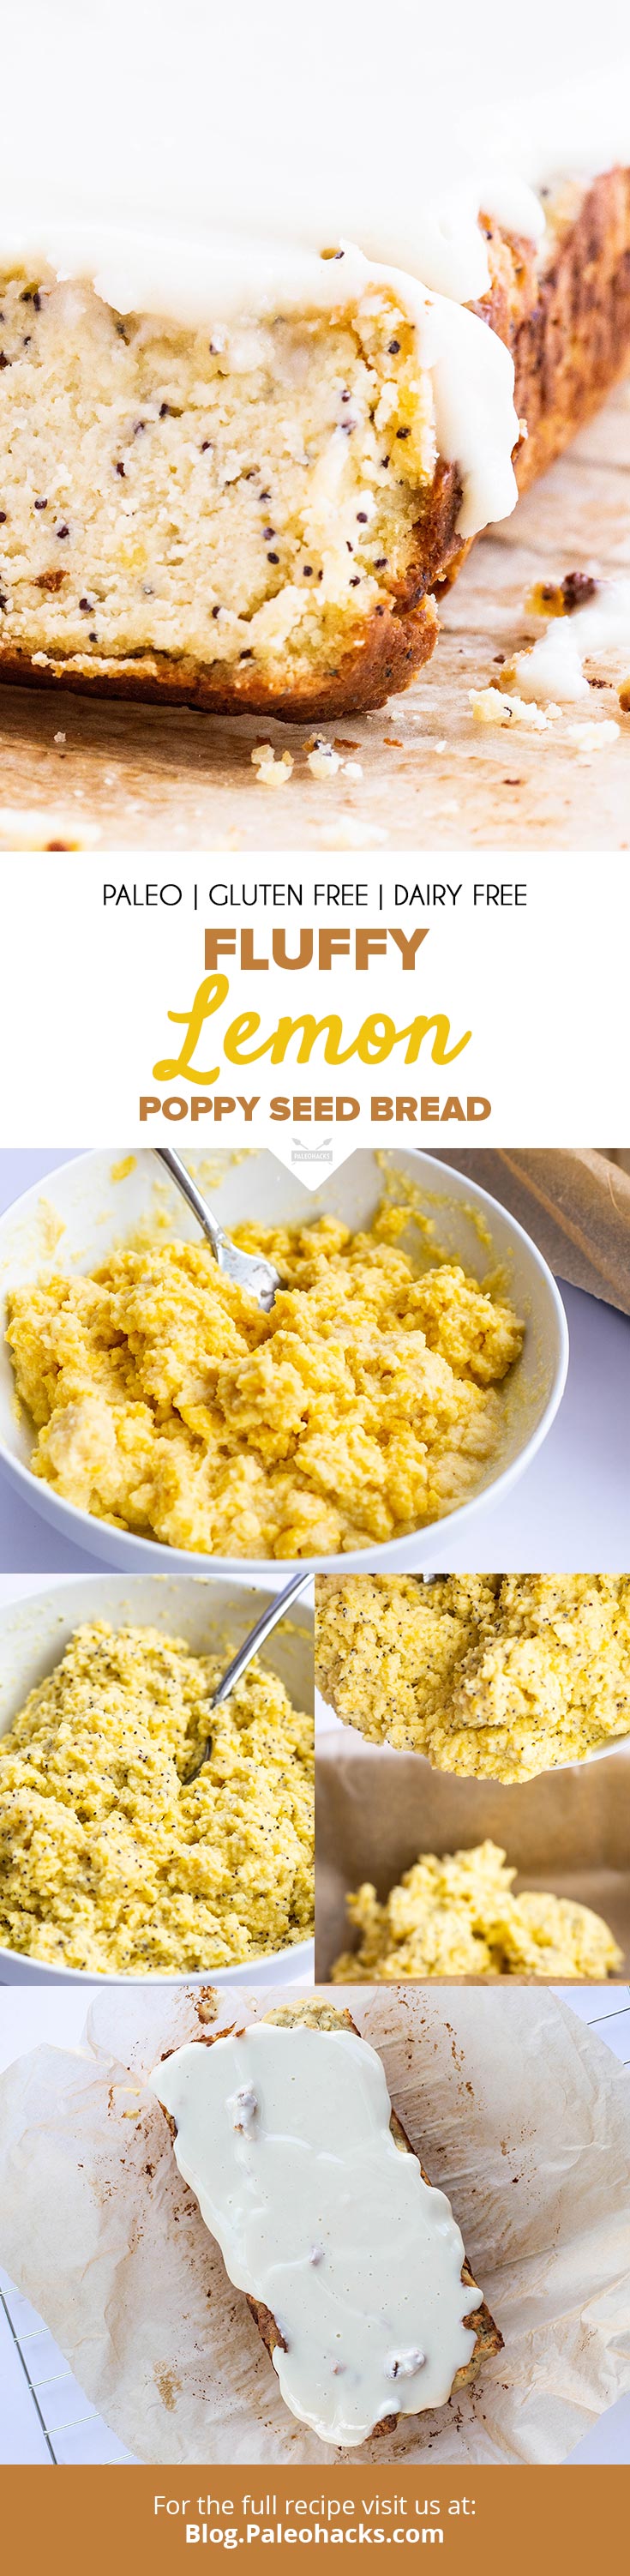 Naturally filled with fiber, this Lemon Poppy Seed Bread is gluten-free, dairy-free, and low-carb. Lemon lovers, meet your new favorite bread!